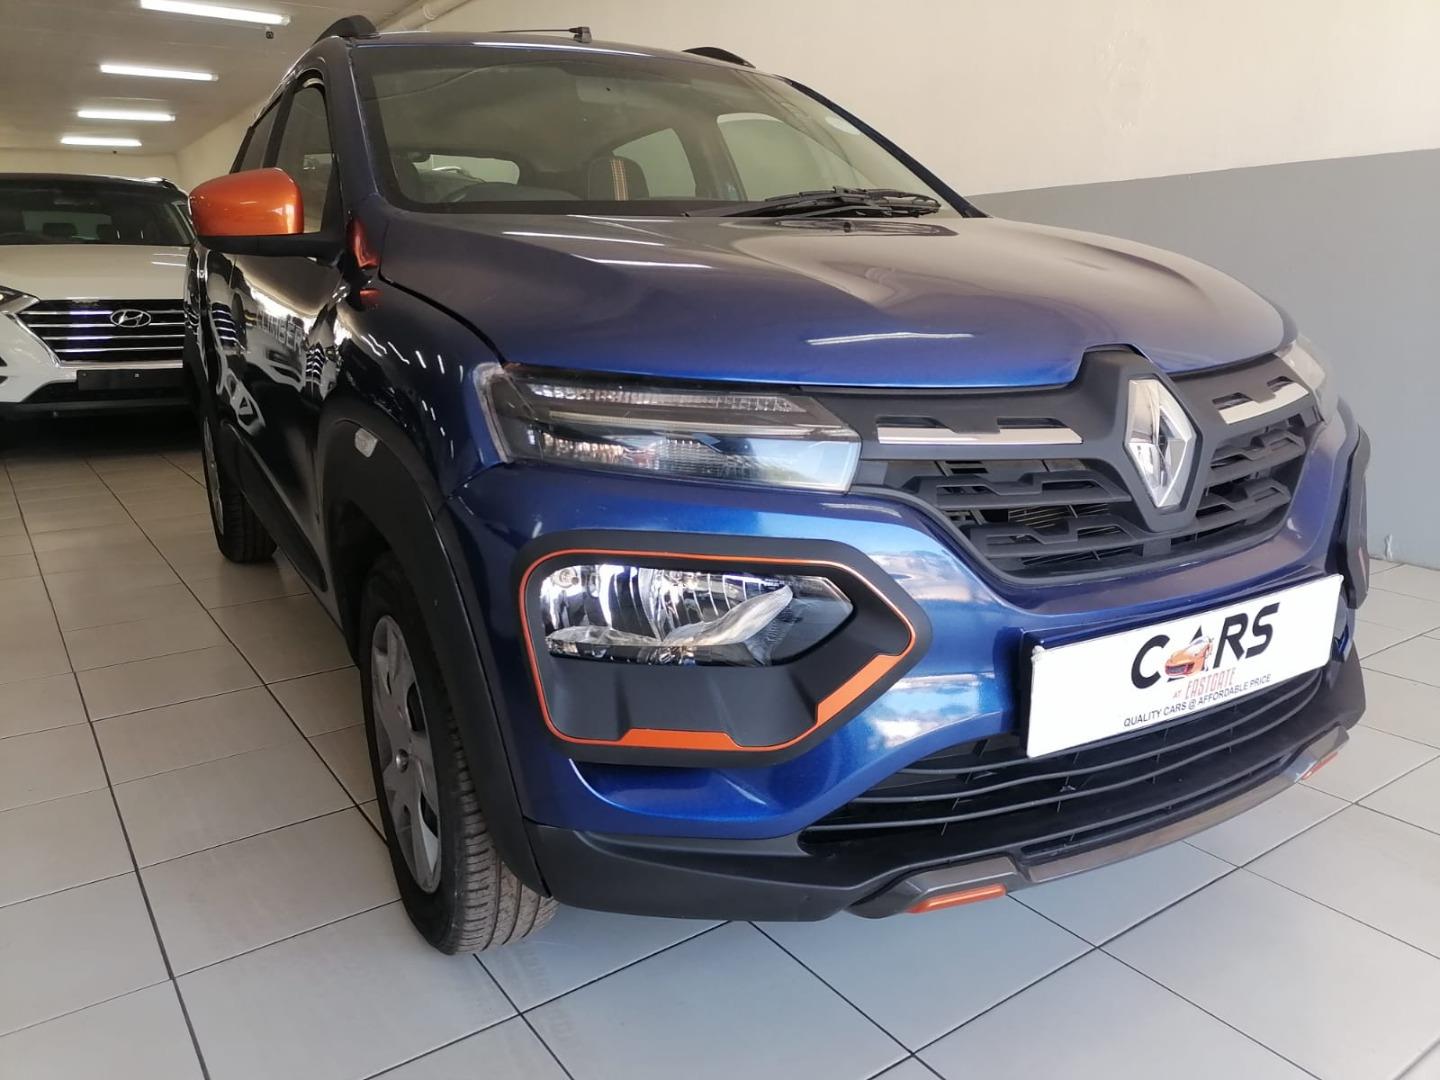 2021 Renault Kwid 1.0 Climber Auto For Sale